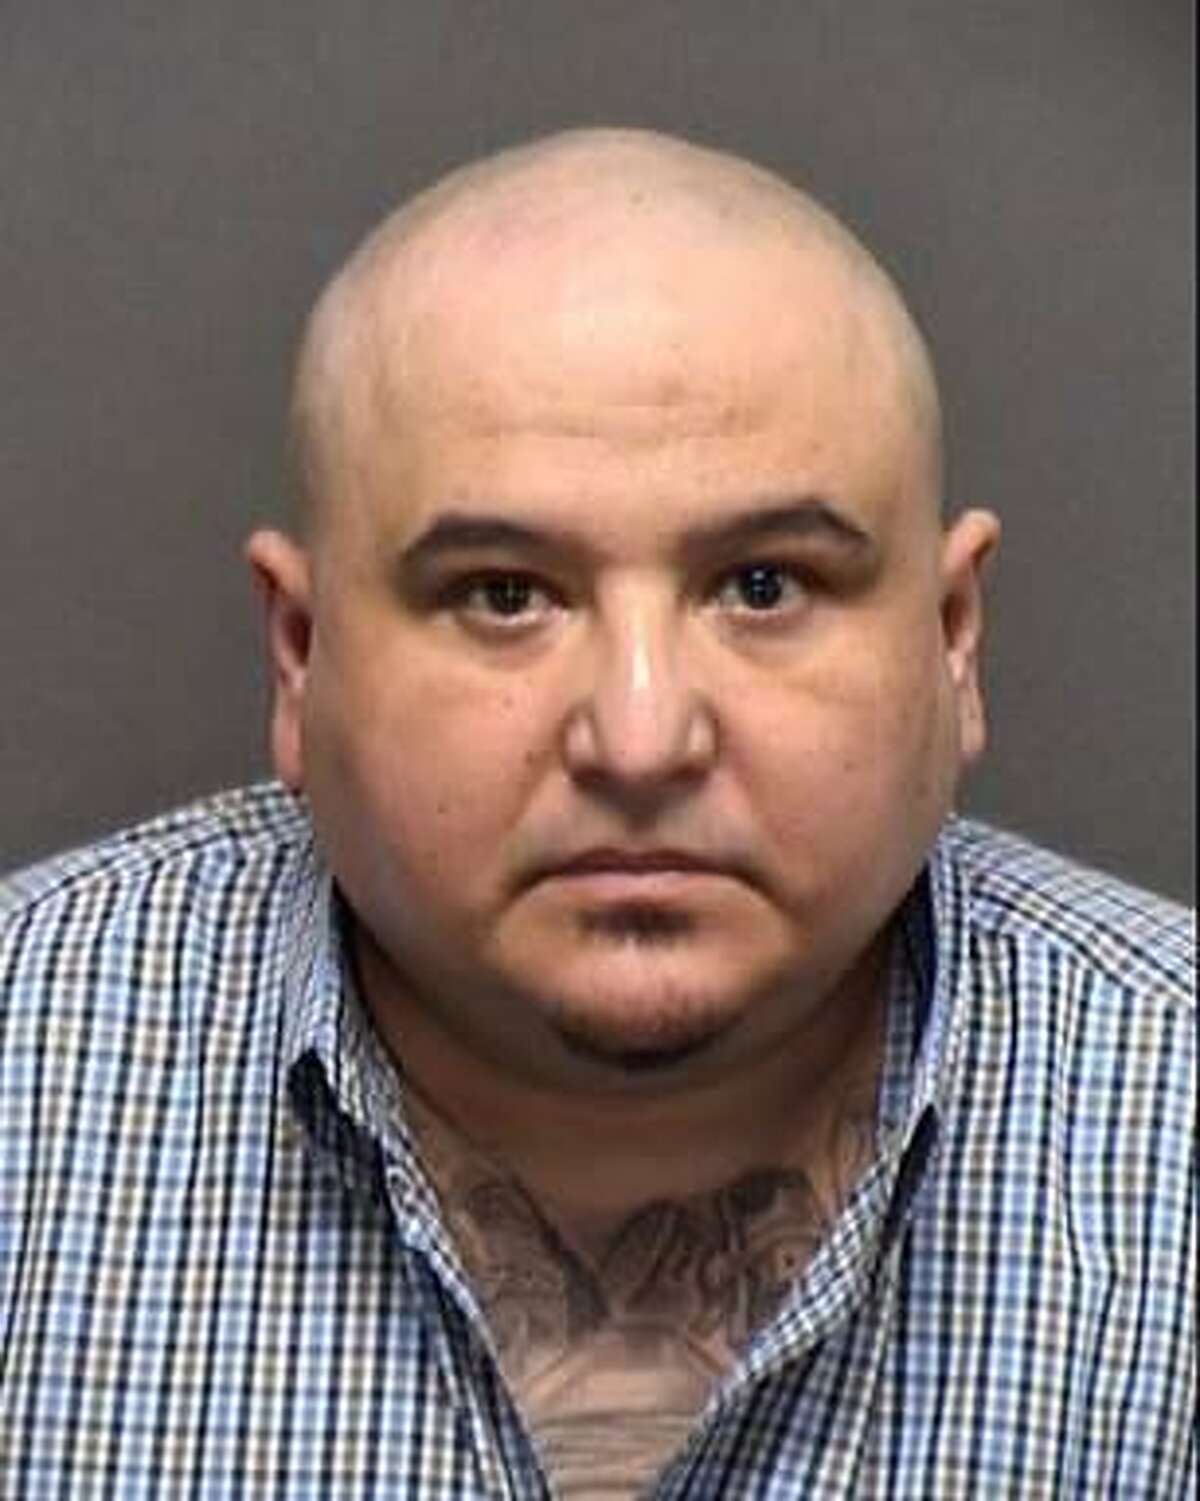 Mario Morales, 46, was sentenced Monday to life in prison for continuous sexual abuse of a child.